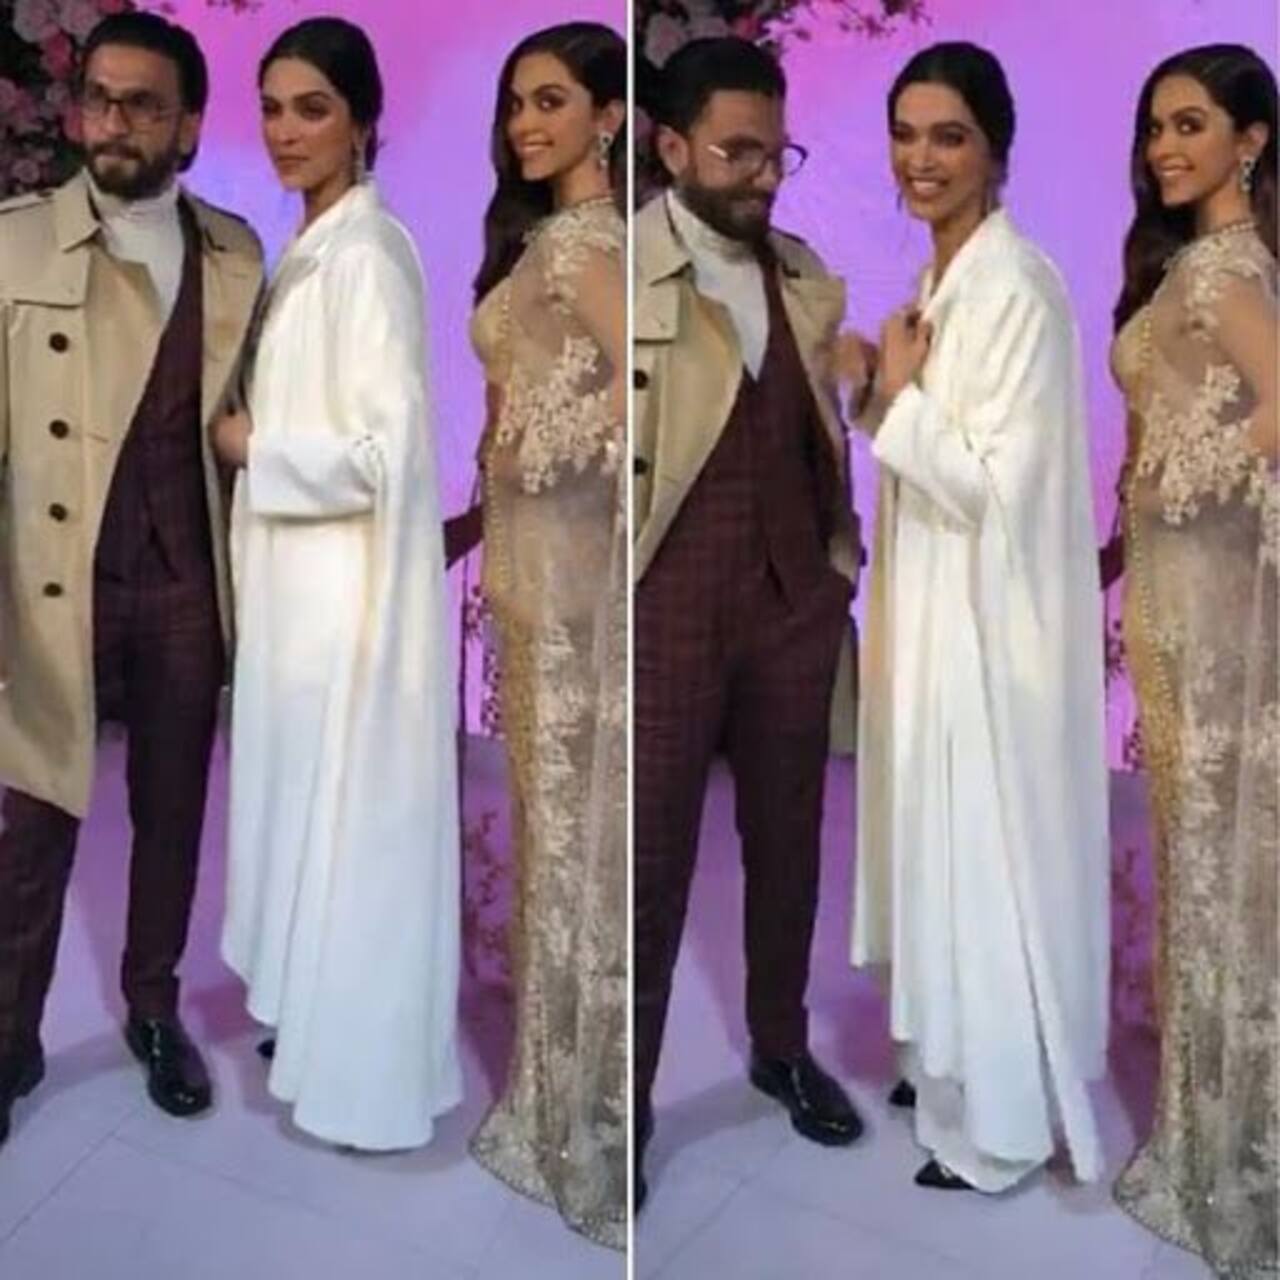 Deepika Padukone unveils her wax statue at Madame Tussauds with hubby Ranveer Singh and the entire fam jam - view pics and videos